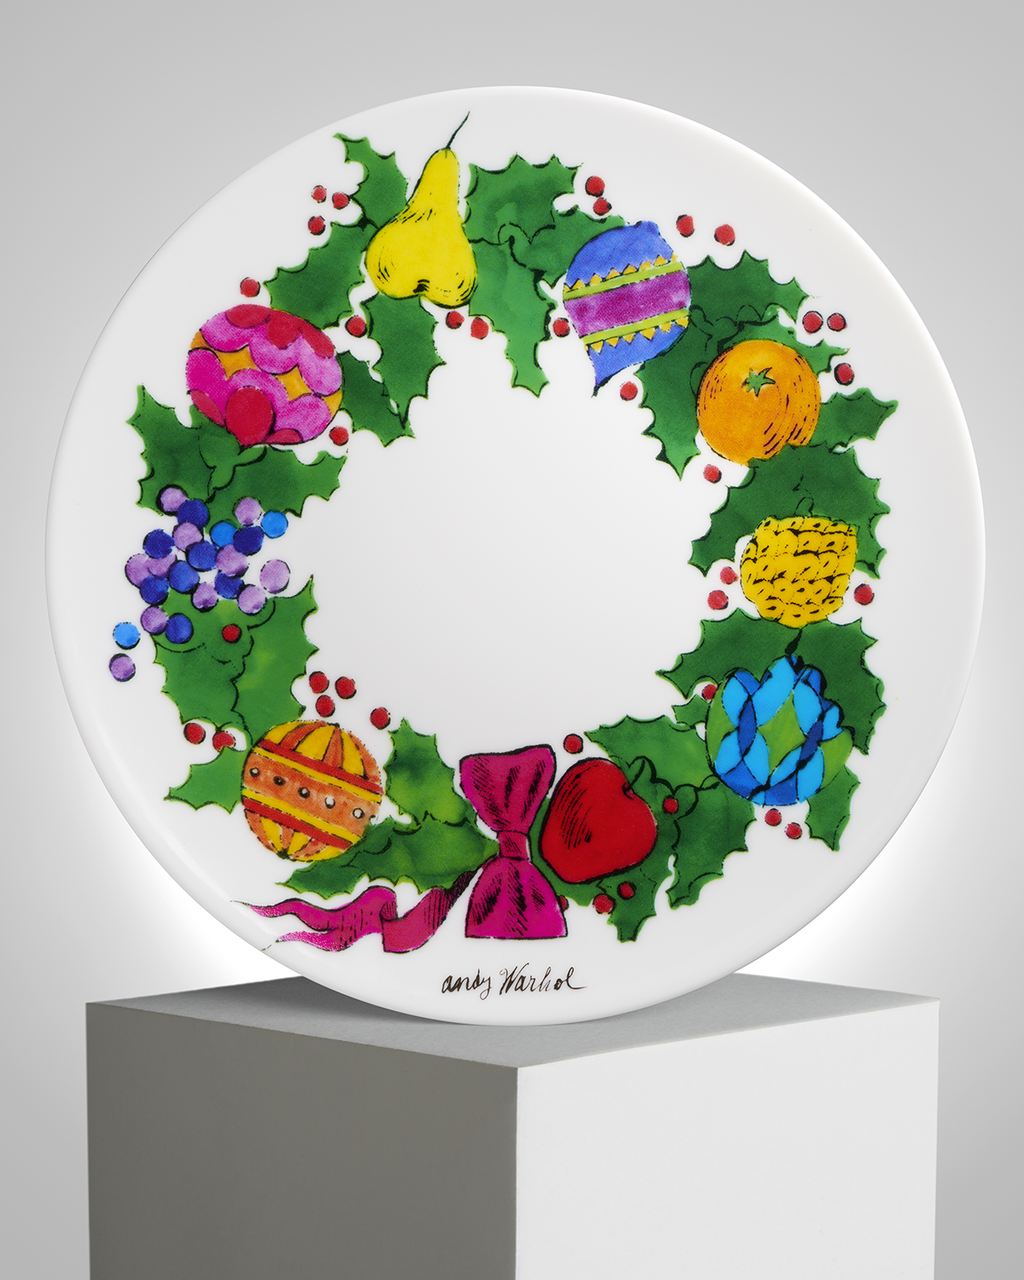 ANDY WARHOL PORCELAIN PLATE -  Wreath - CHRISTMAS COLLECTION